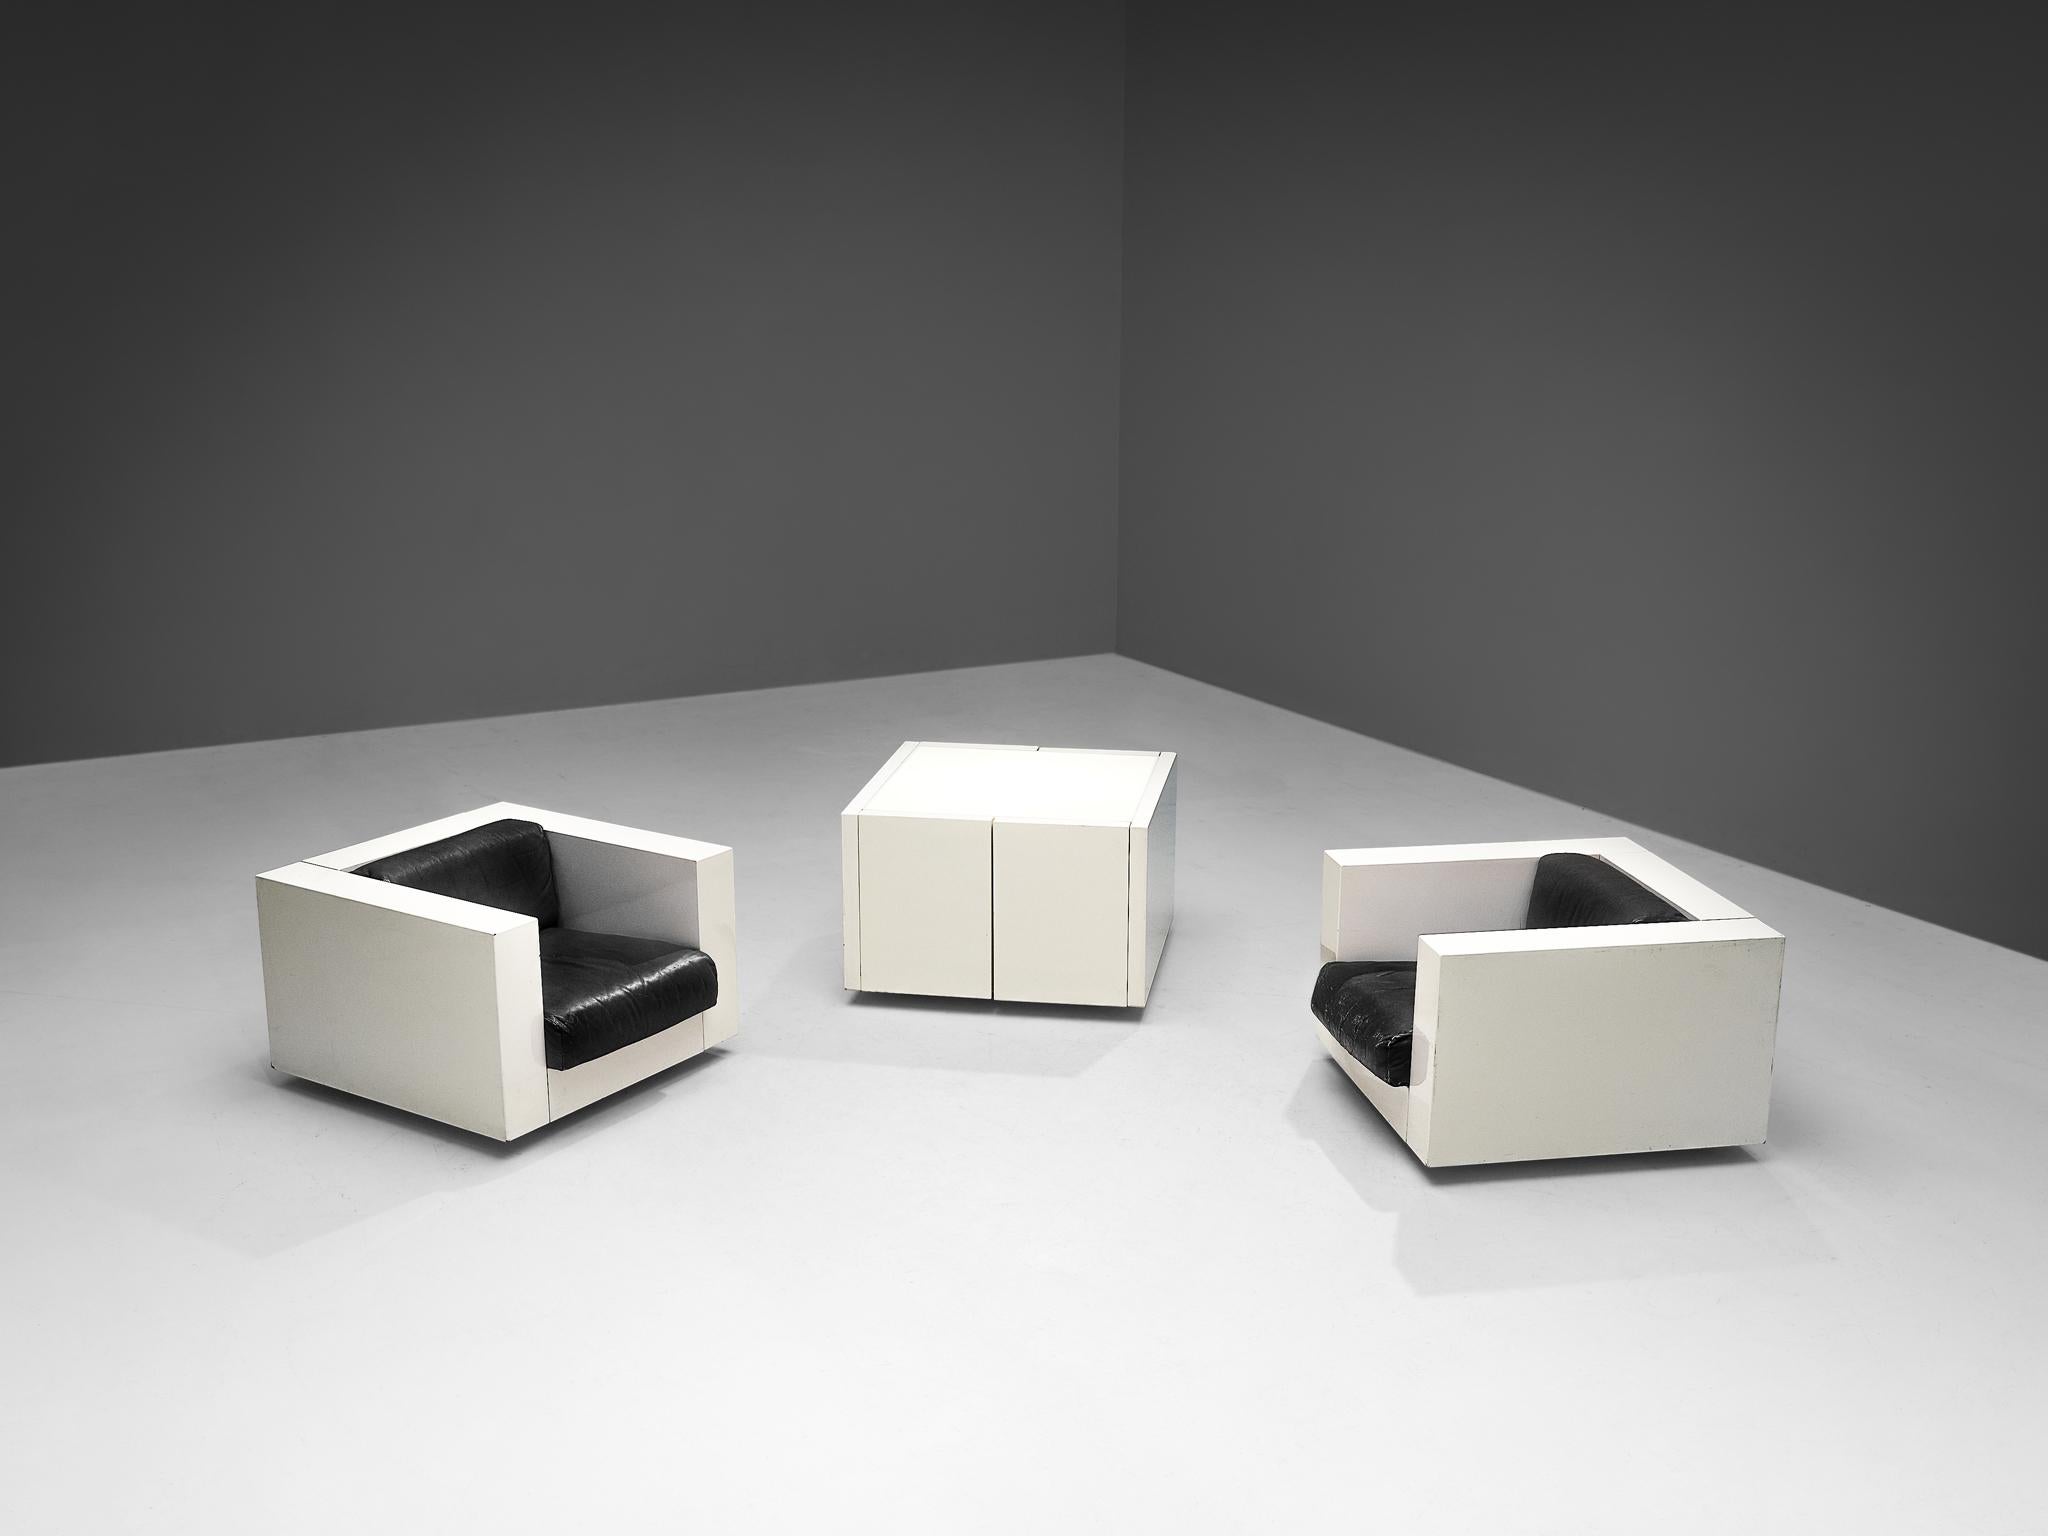 Massimo and Lella Vignelli for Poltronova, set of 'Saratoga' lounge chairs and coffee table/cabinet, polyester lacquer, leather, Italy, 1964 

This set of two lounge chairs and a table is introduced as 'Saratoga'. The combination of the two pieces